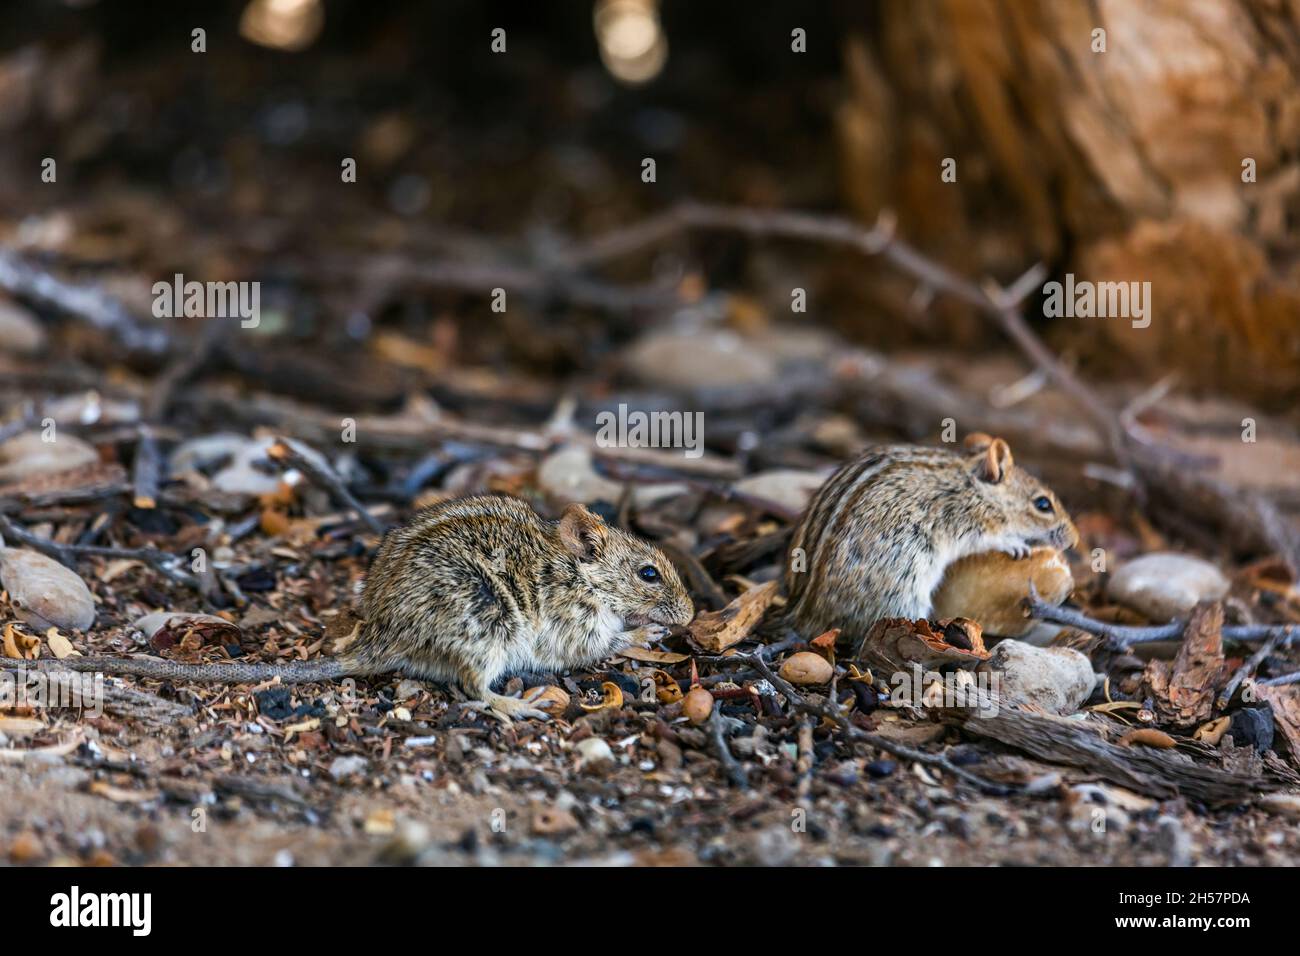 Two Rhabdomys eating on the ground in Kgalagadi transfrontier park, South Africa ; specie Rhabdomys pumilio family of Muridae Stock Photo